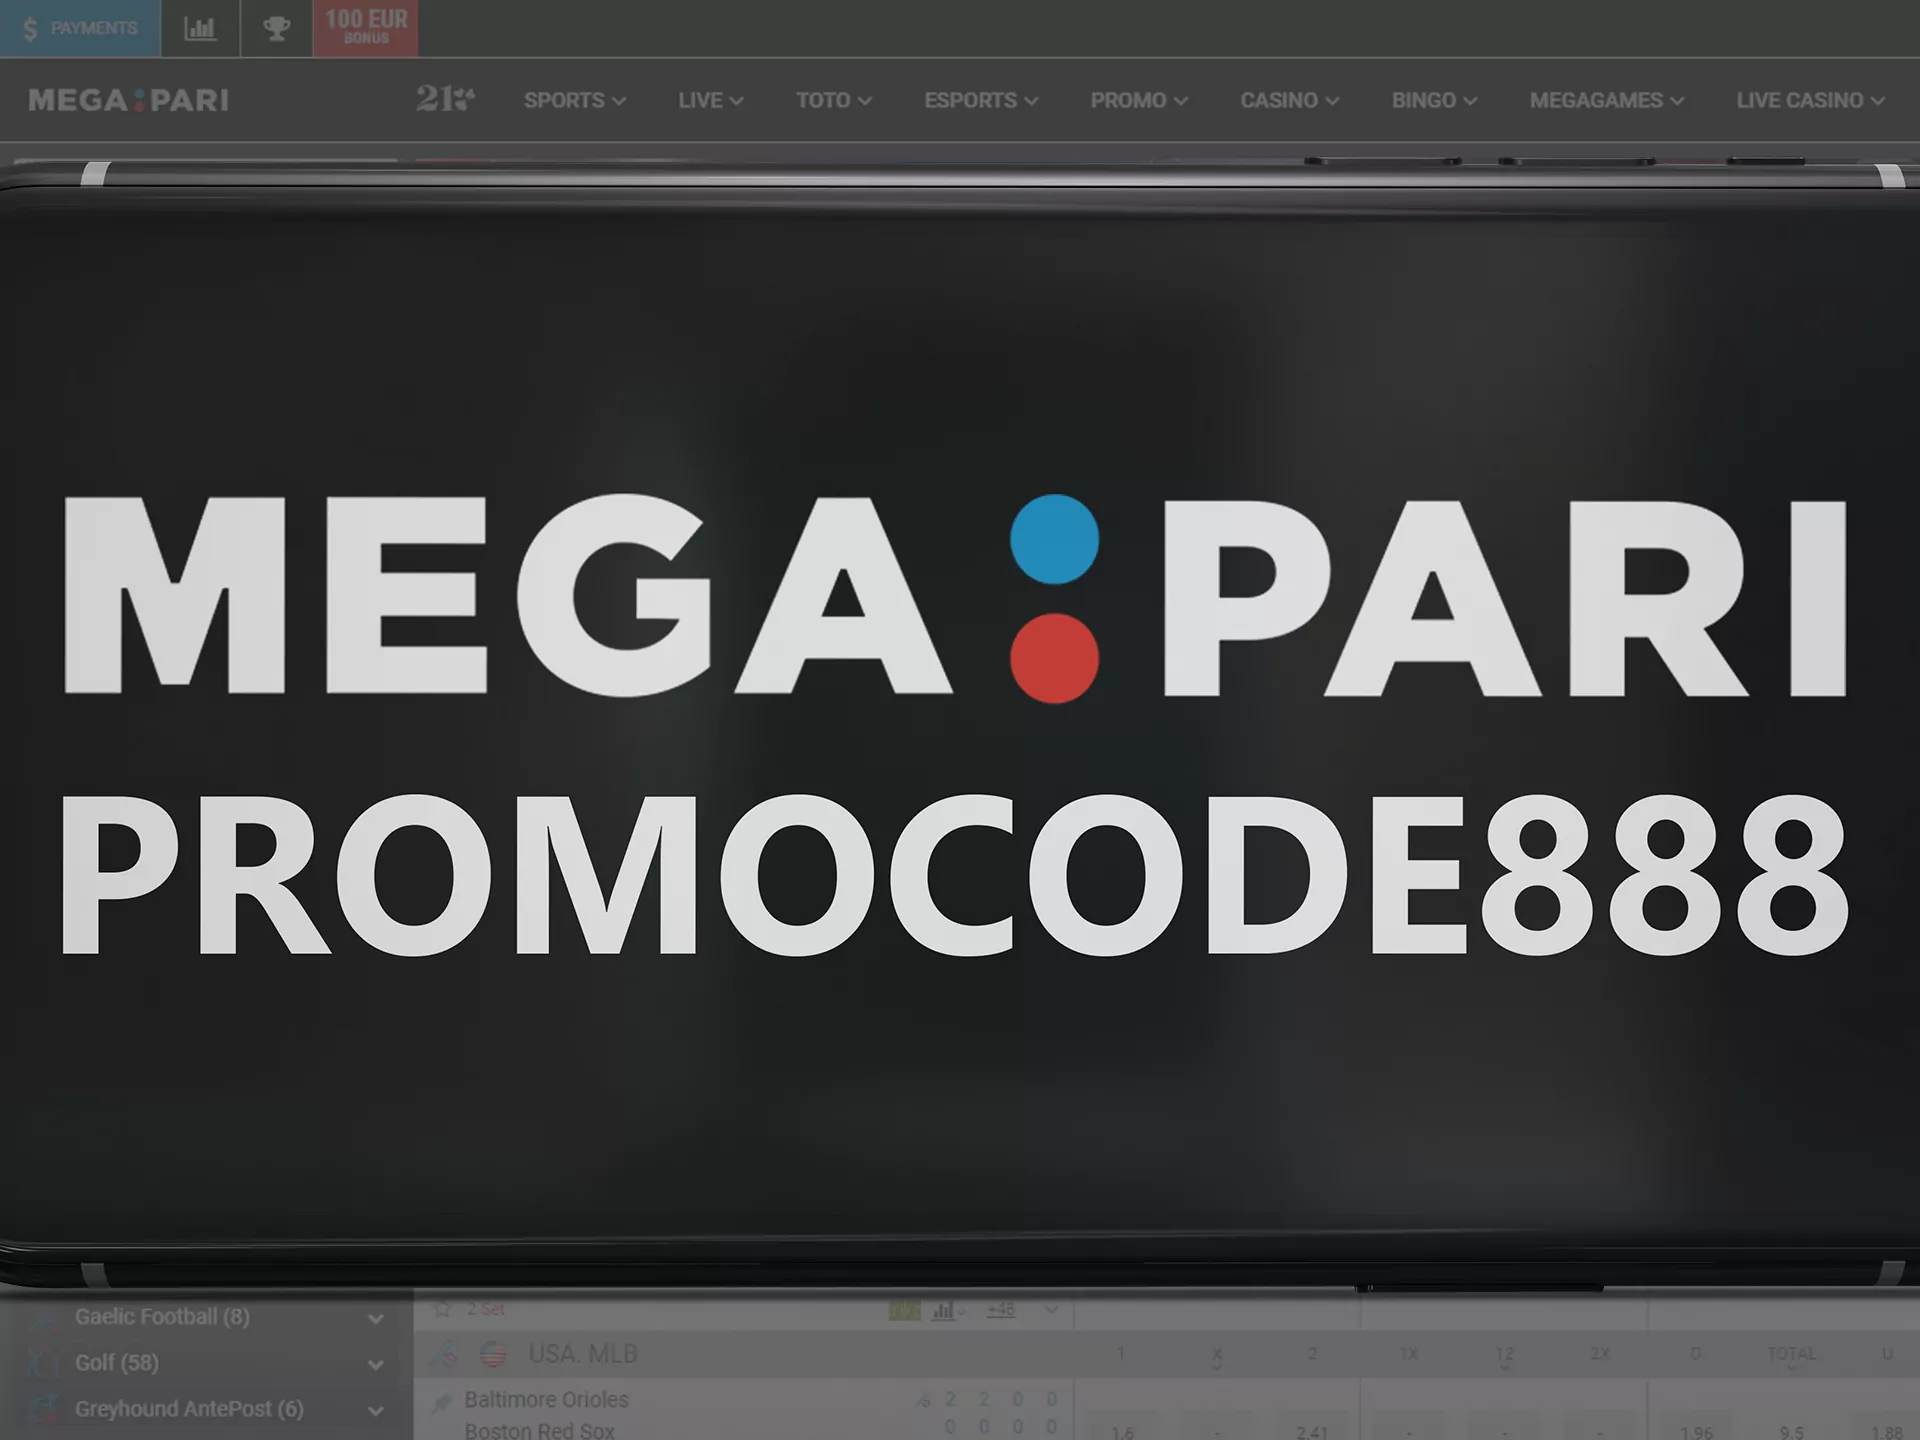 Use our promo code to take part in promotions of Mega Pari.